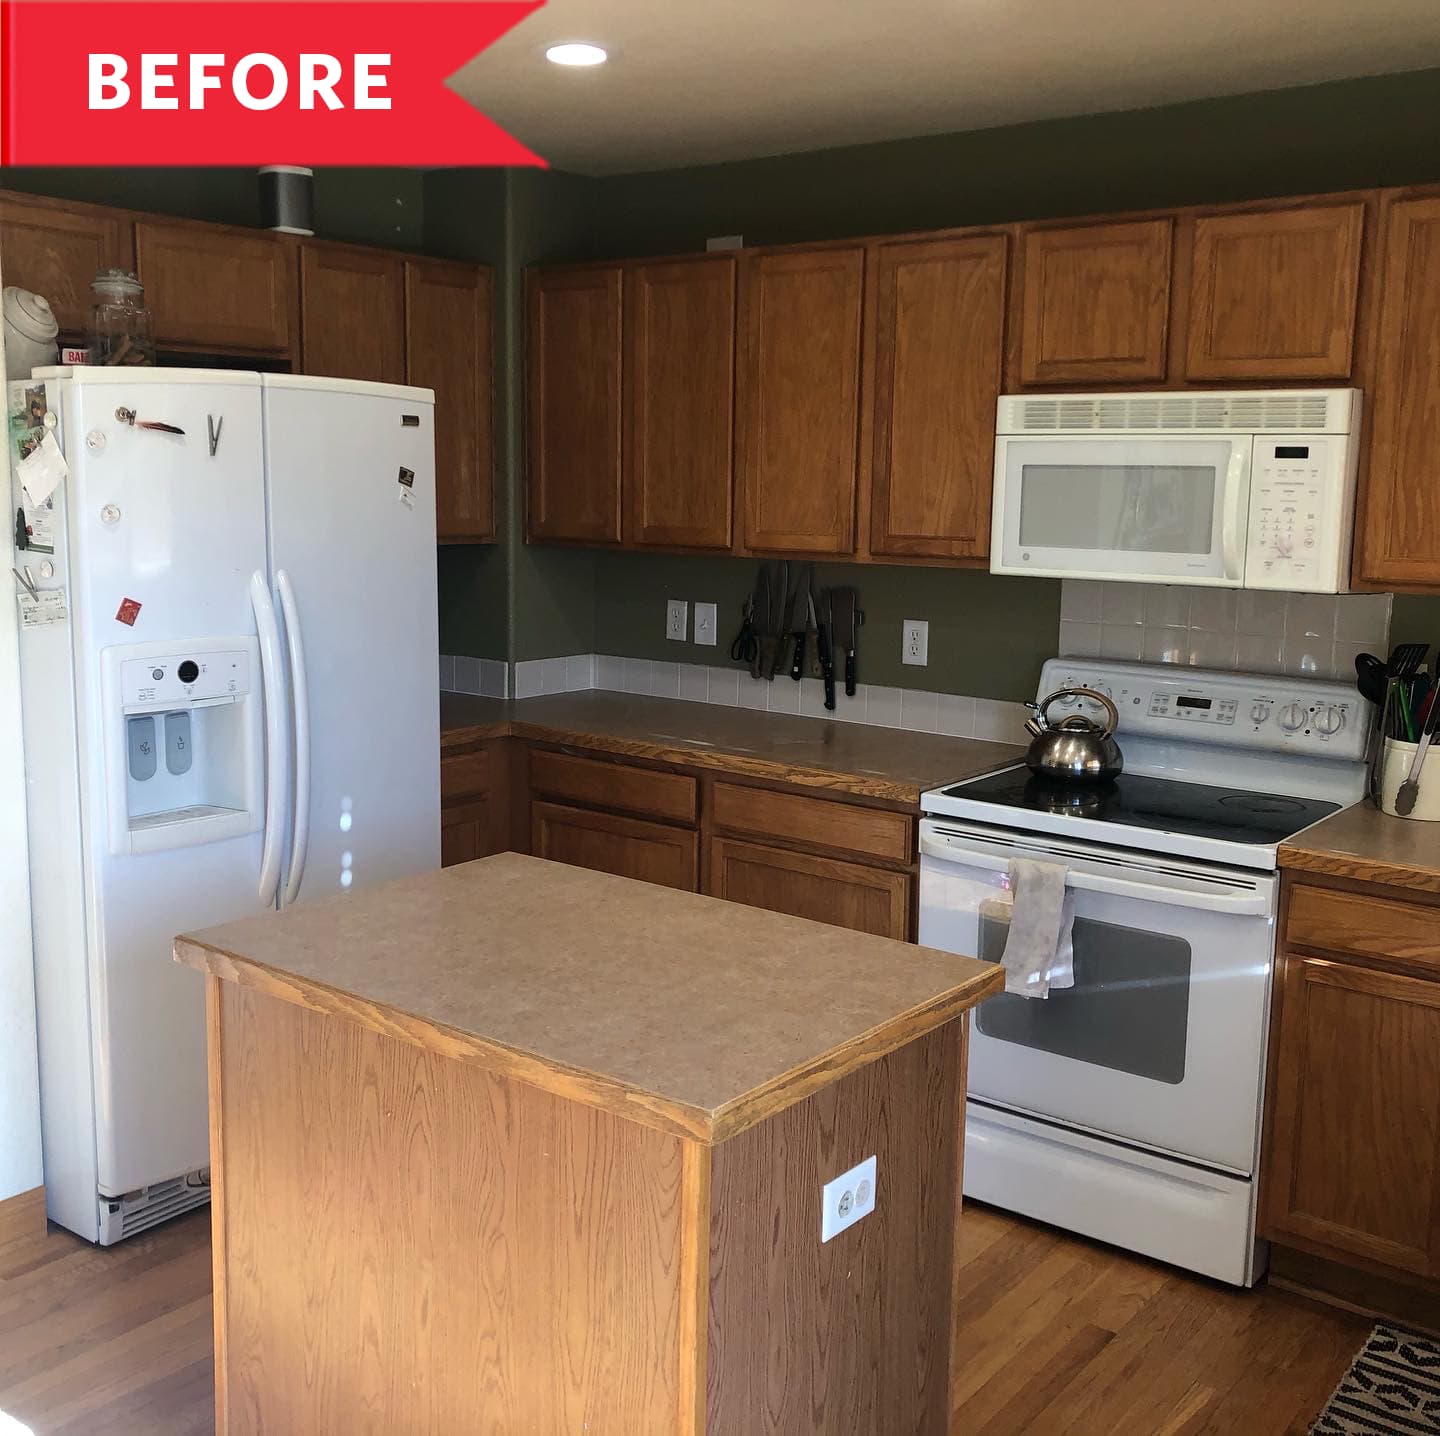 Before: Kitchen with brown cabinets, white appliances, and wooden island in center